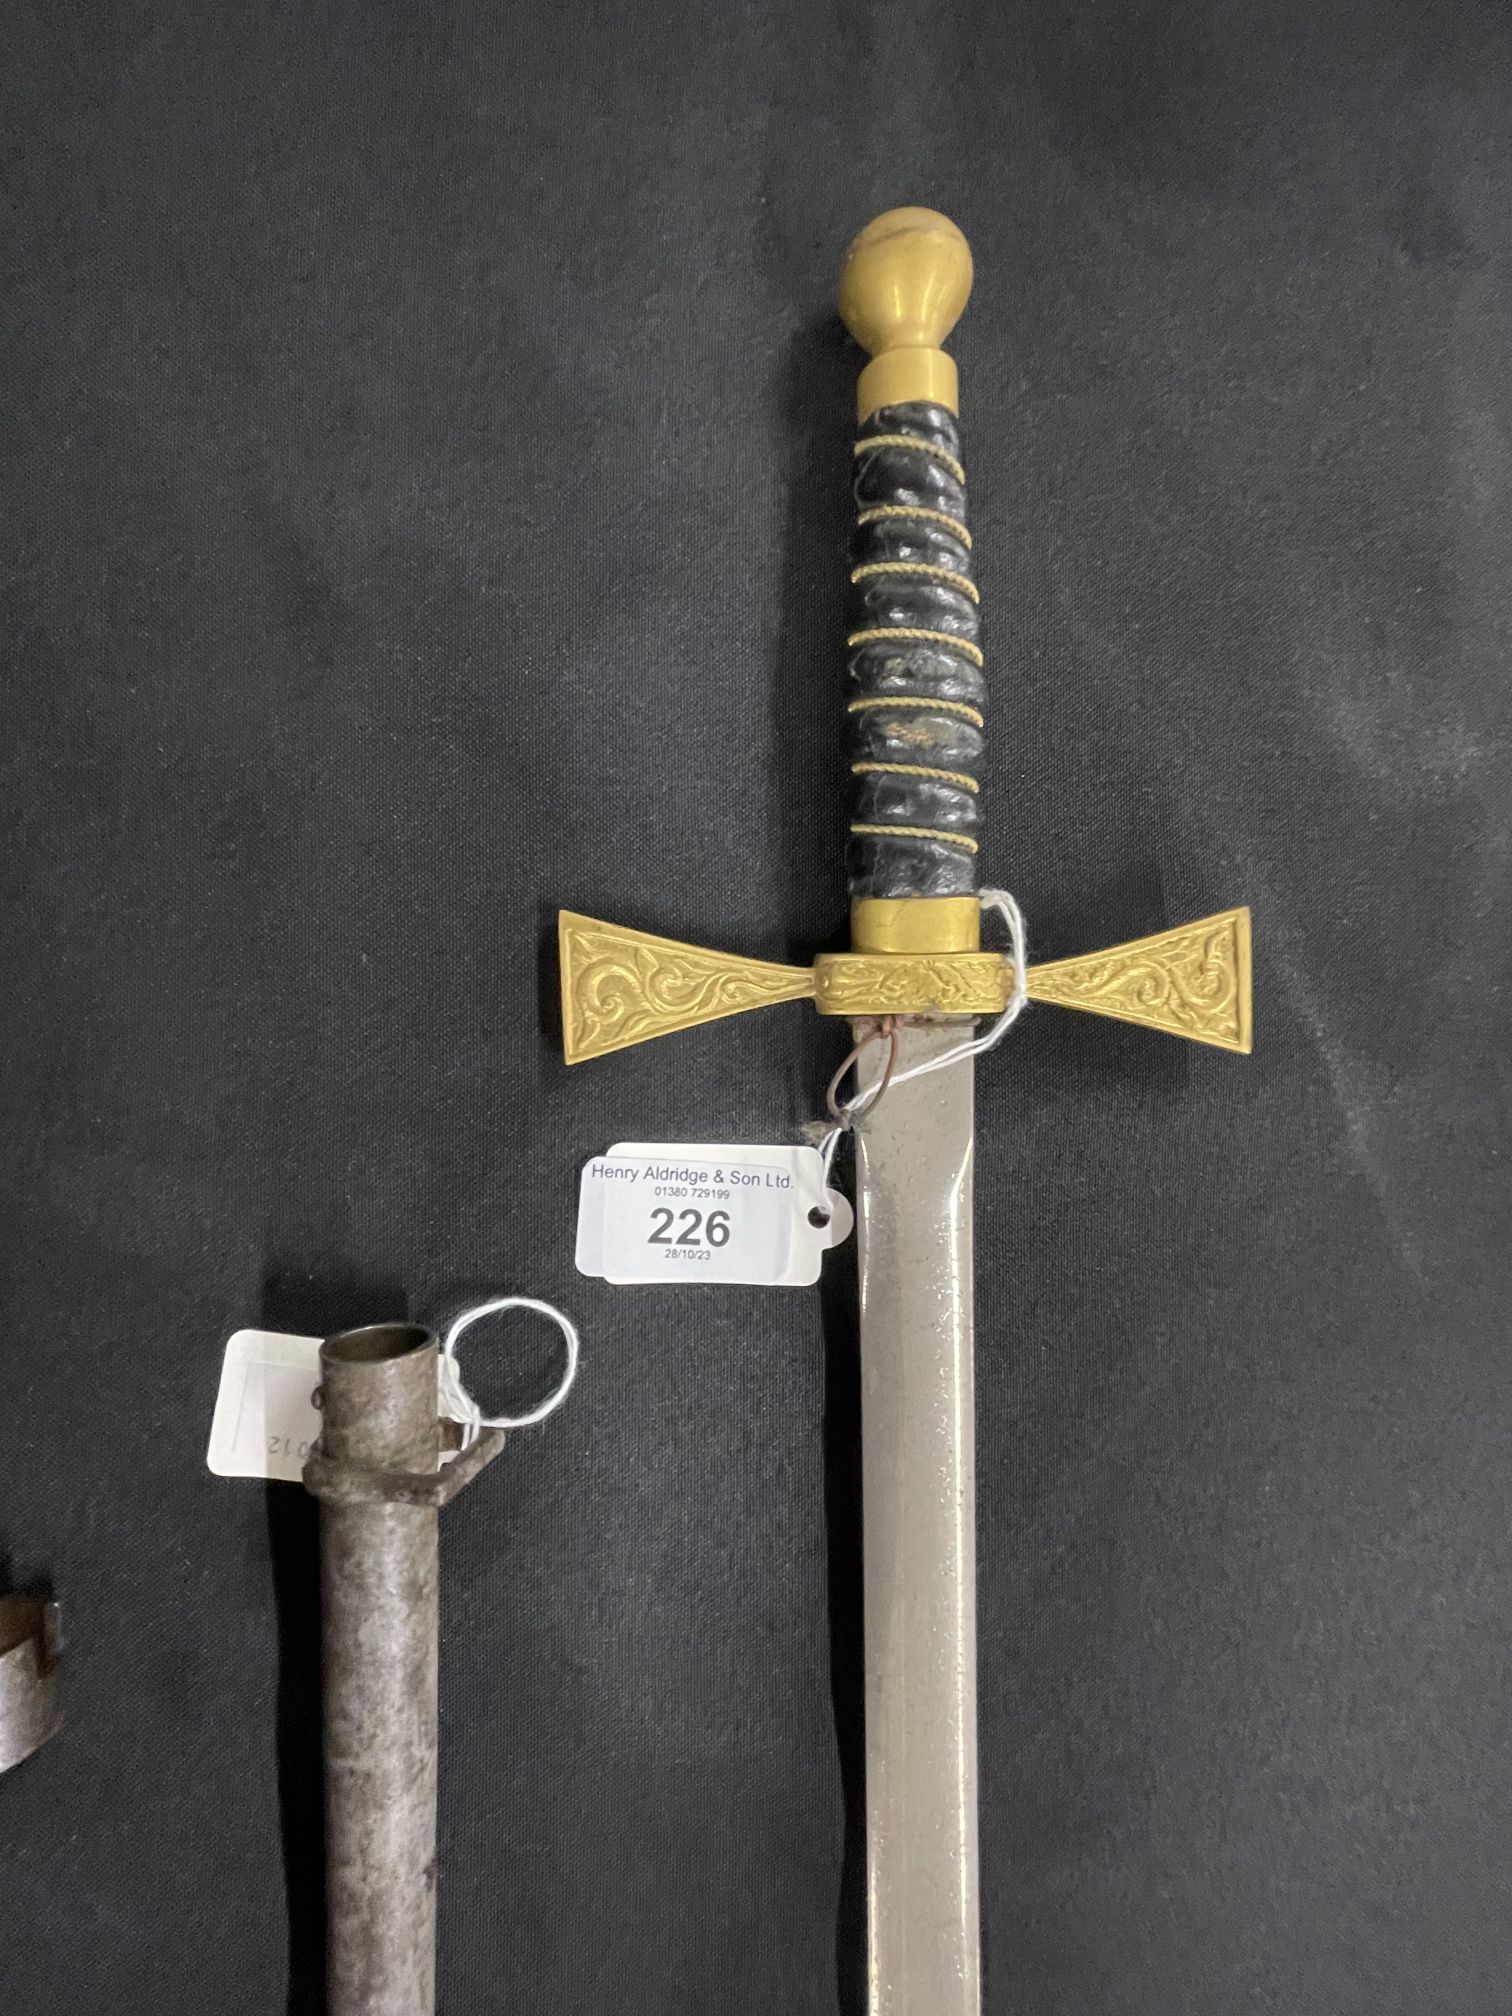 Militaria: Wilkinson's presentation sword with gilt handle, French bayonet. - Image 2 of 3